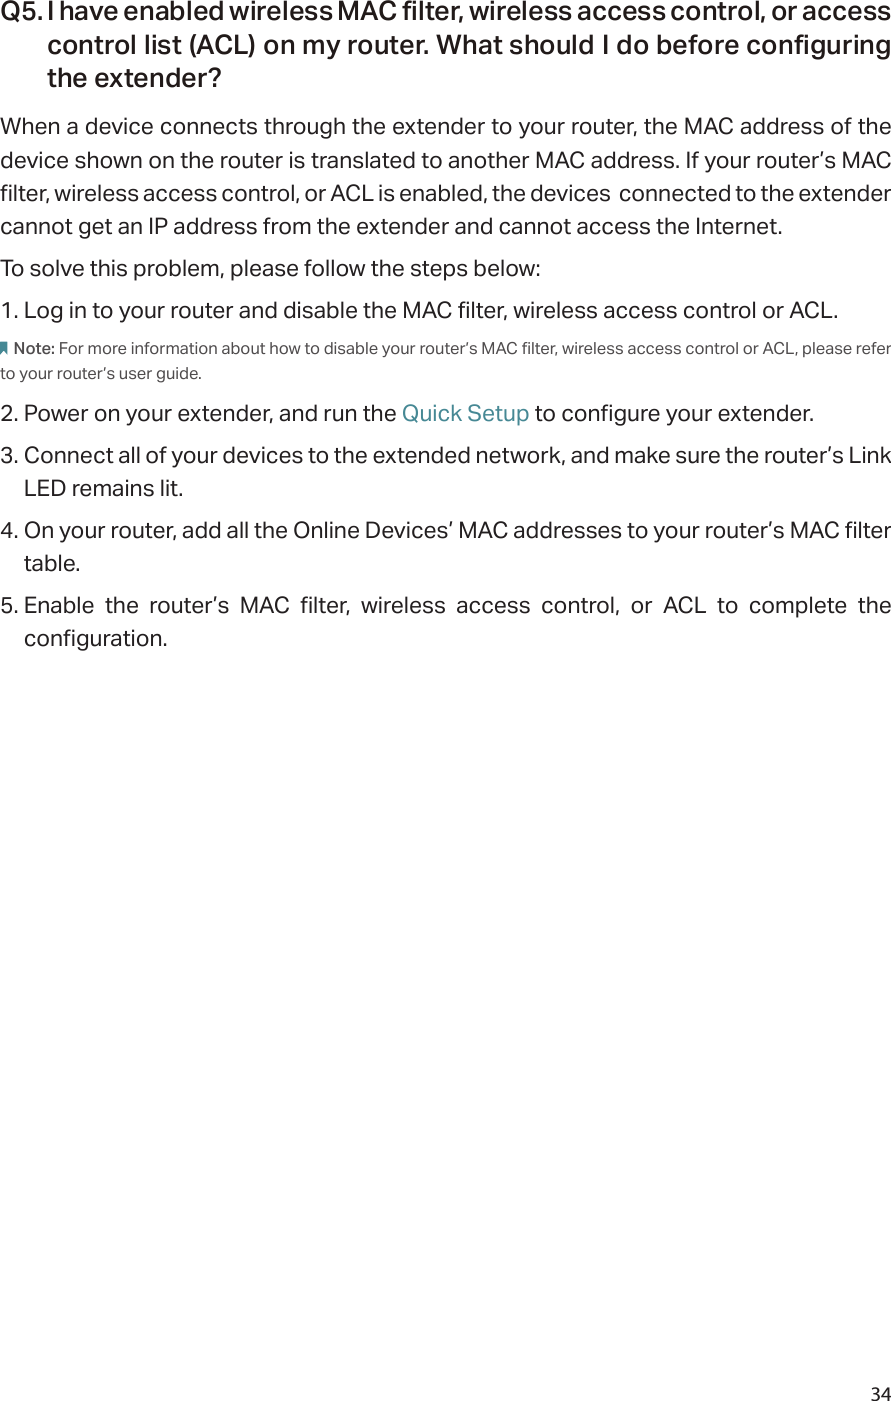 34Q5. I have enabled wireless MAC filter, wireless access control, or access control list (ACL) on my router. What should I do before configuring the extender?When a device connects through the extender to your router, the MAC address of the device shown on the router is translated to another MAC address. If your router’s MAC filter, wireless access control, or ACL is enabled, the devices  connected to the extender cannot get an IP address from the extender and cannot access the Internet.To solve this problem, please follow the steps below:1. Log in to your router and disable the MAC filter, wireless access control or ACL.Note: For more information about how to disable your router’s MAC filter, wireless access control or ACL, please refer to your router’s user guide.2. Power on your extender, and run the Quick Setup to configure your extender.3. Connect all of your devices to the extended network, and make sure the router’s Link LED remains lit.4. On your router, add all the Online Devices’ MAC addresses to your router’s MAC filter table.5. Enable the router’s MAC filter, wireless access control, or ACL to complete the configuration. 